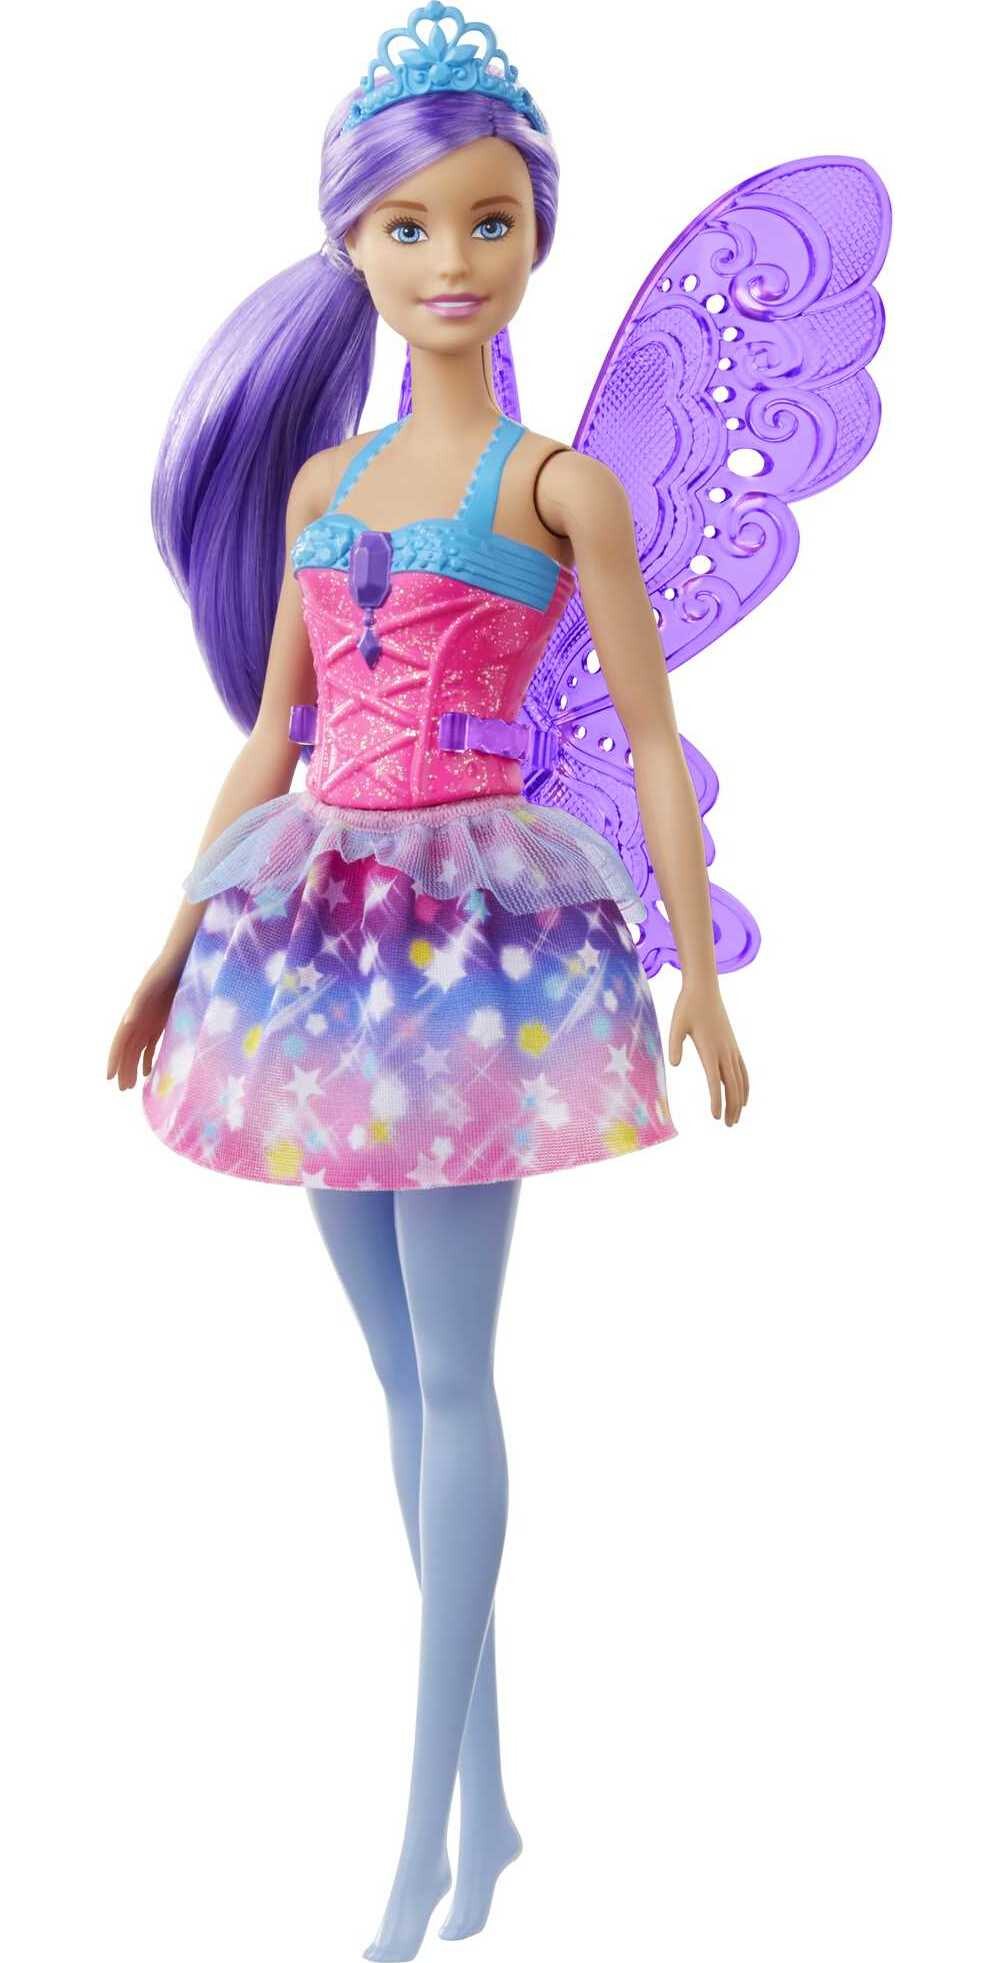 Barbie Dreamtopia Fairy Doll with Purple Hair, Removable Wings & Tiara Accessory - image 1 of 6